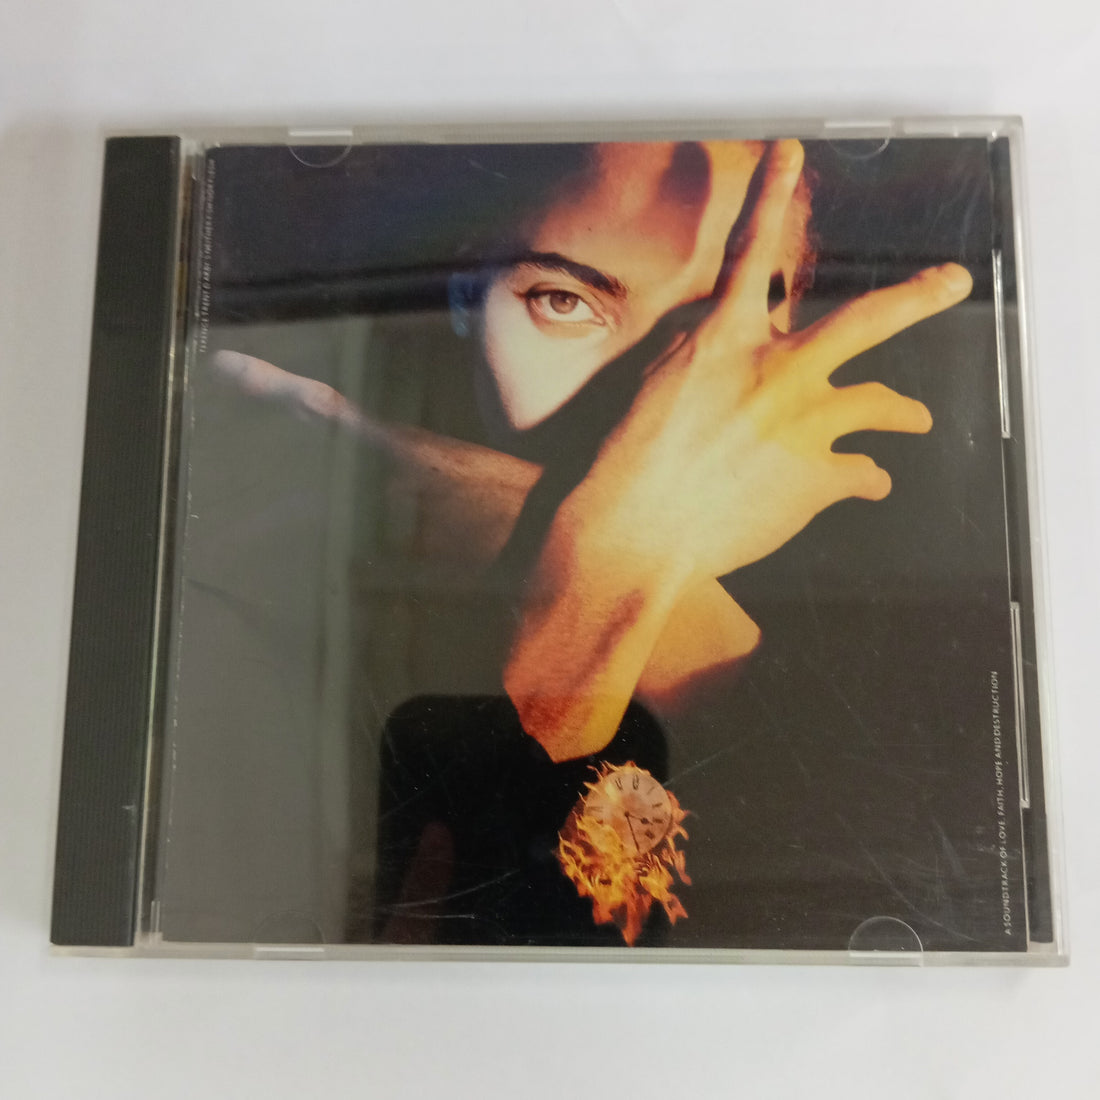 Terence Trent D'Arby - Terence Trent D'Arby's Neither Fish Nor Flesh: A Soundtrack Of Love, Faith, Hope, And Destruction (CD) (VG+)